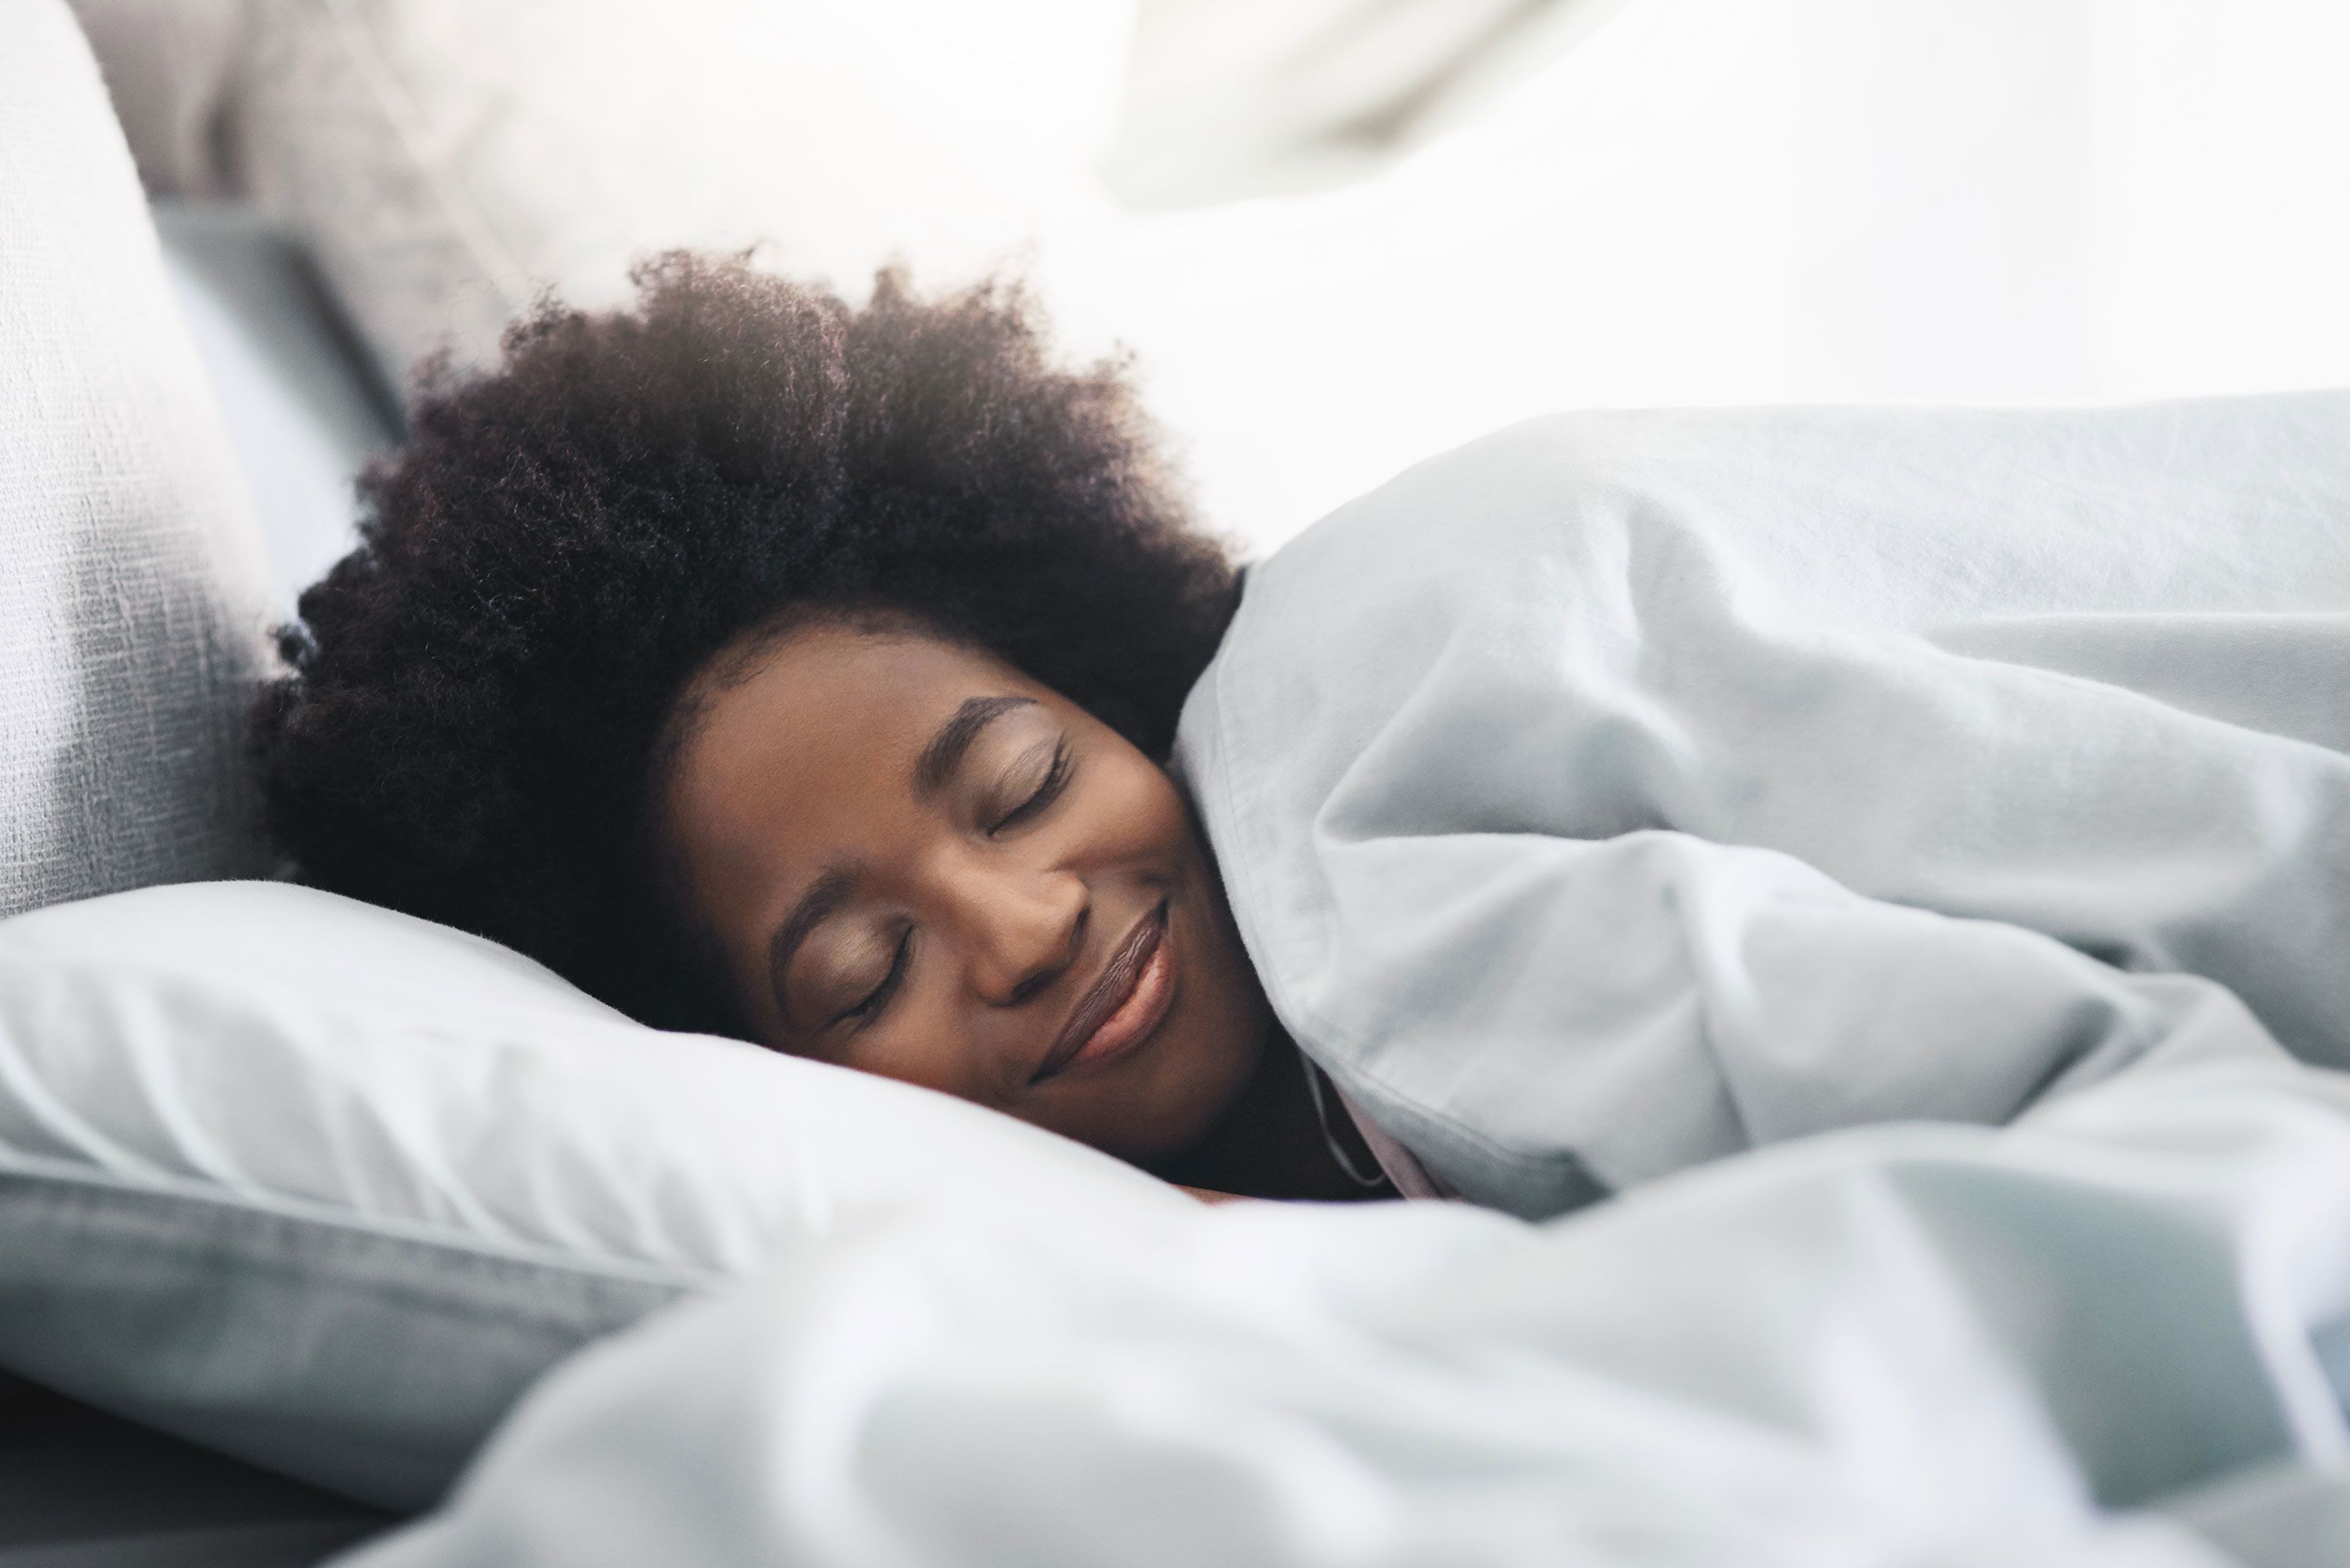 Sleeping in on Weekends Could Prevent Early Death - Sleep Benefits